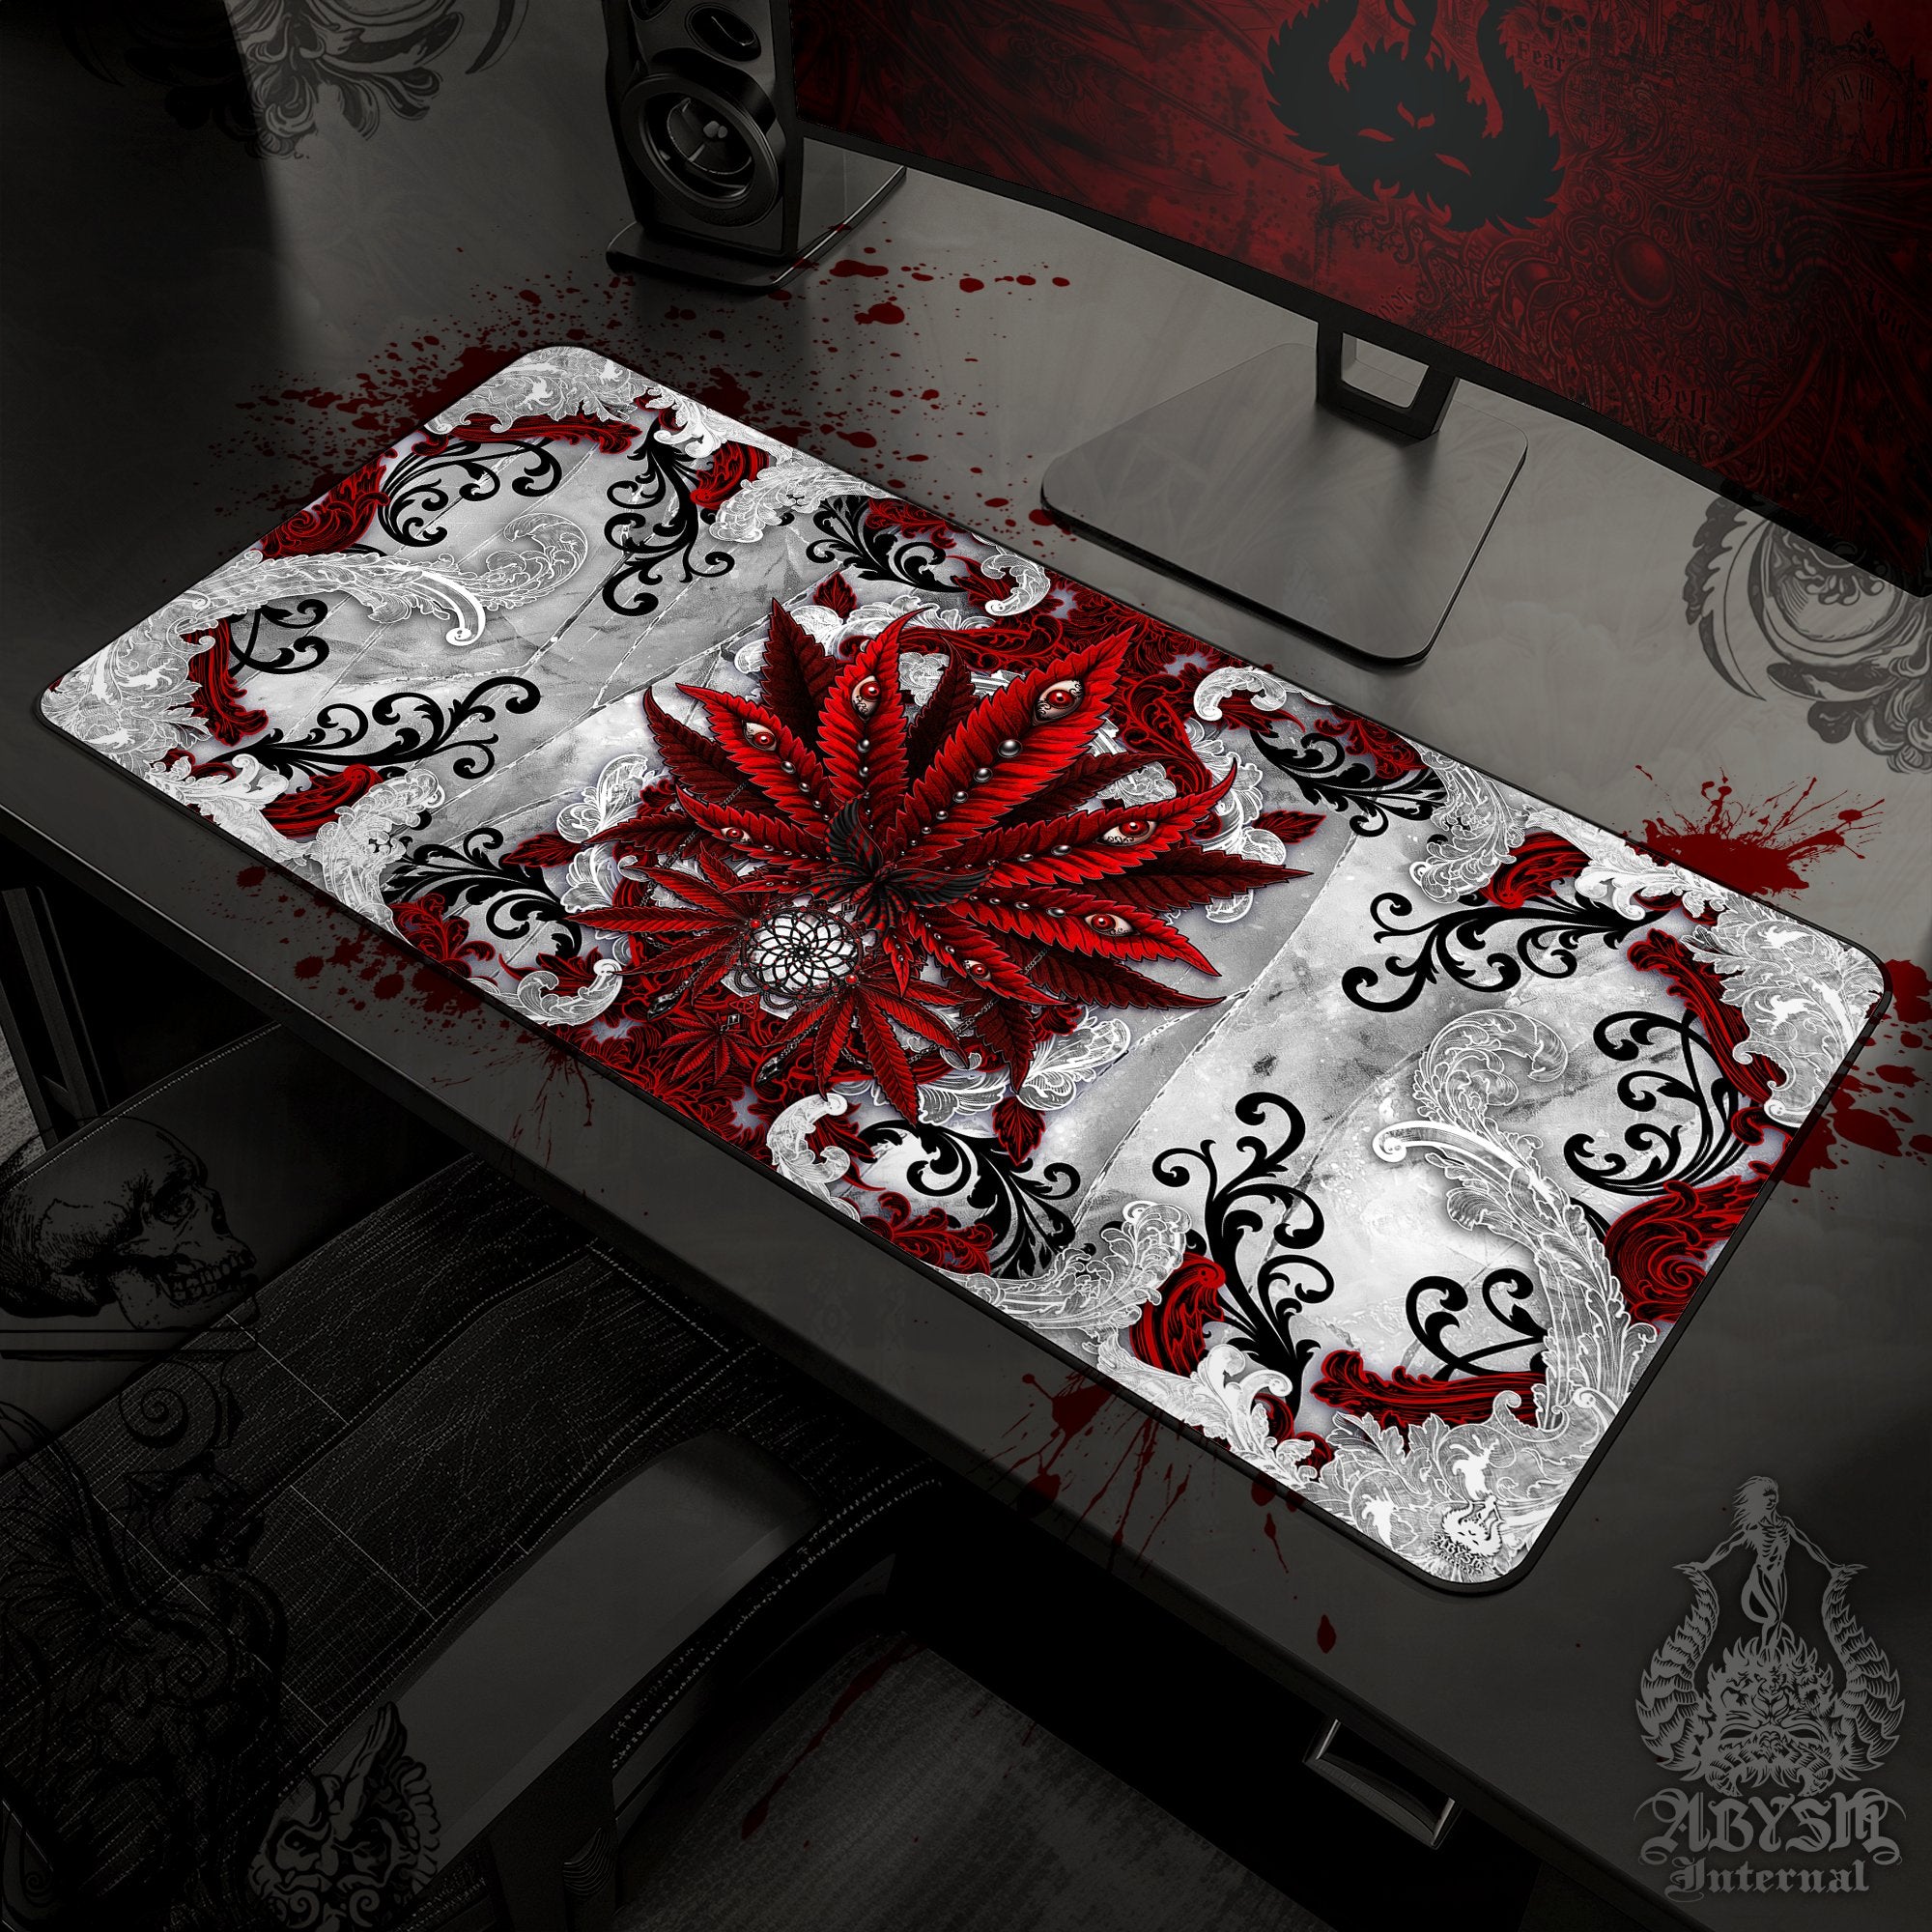 White Goth Cannabis Workpad, 420 Desk Mat, Red Weed Gaming Mouse Pad, Marijuana Table Protector Cover, Art Print - Abysm Internal